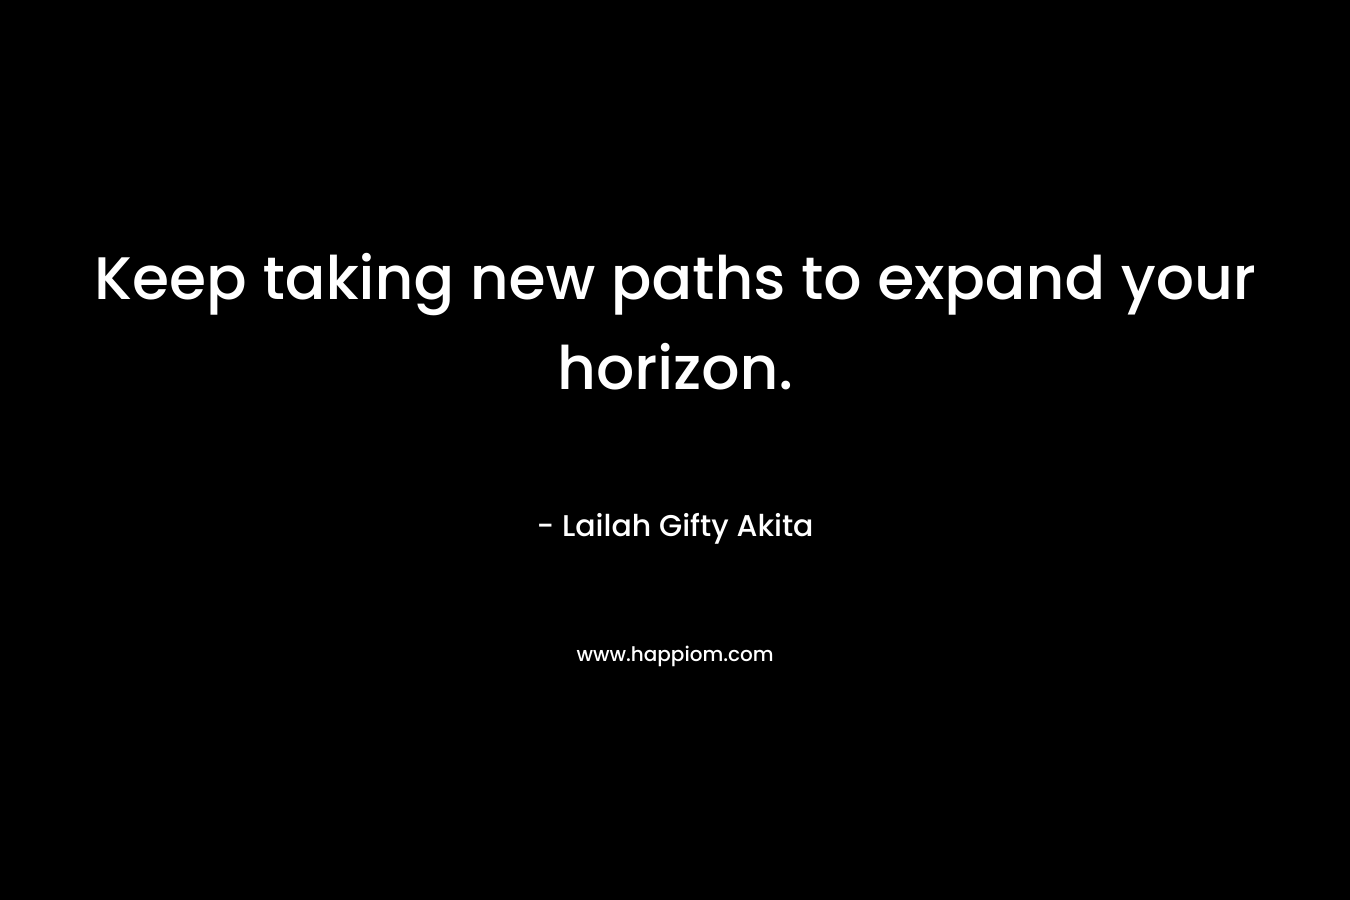 Keep taking new paths to expand your horizon.